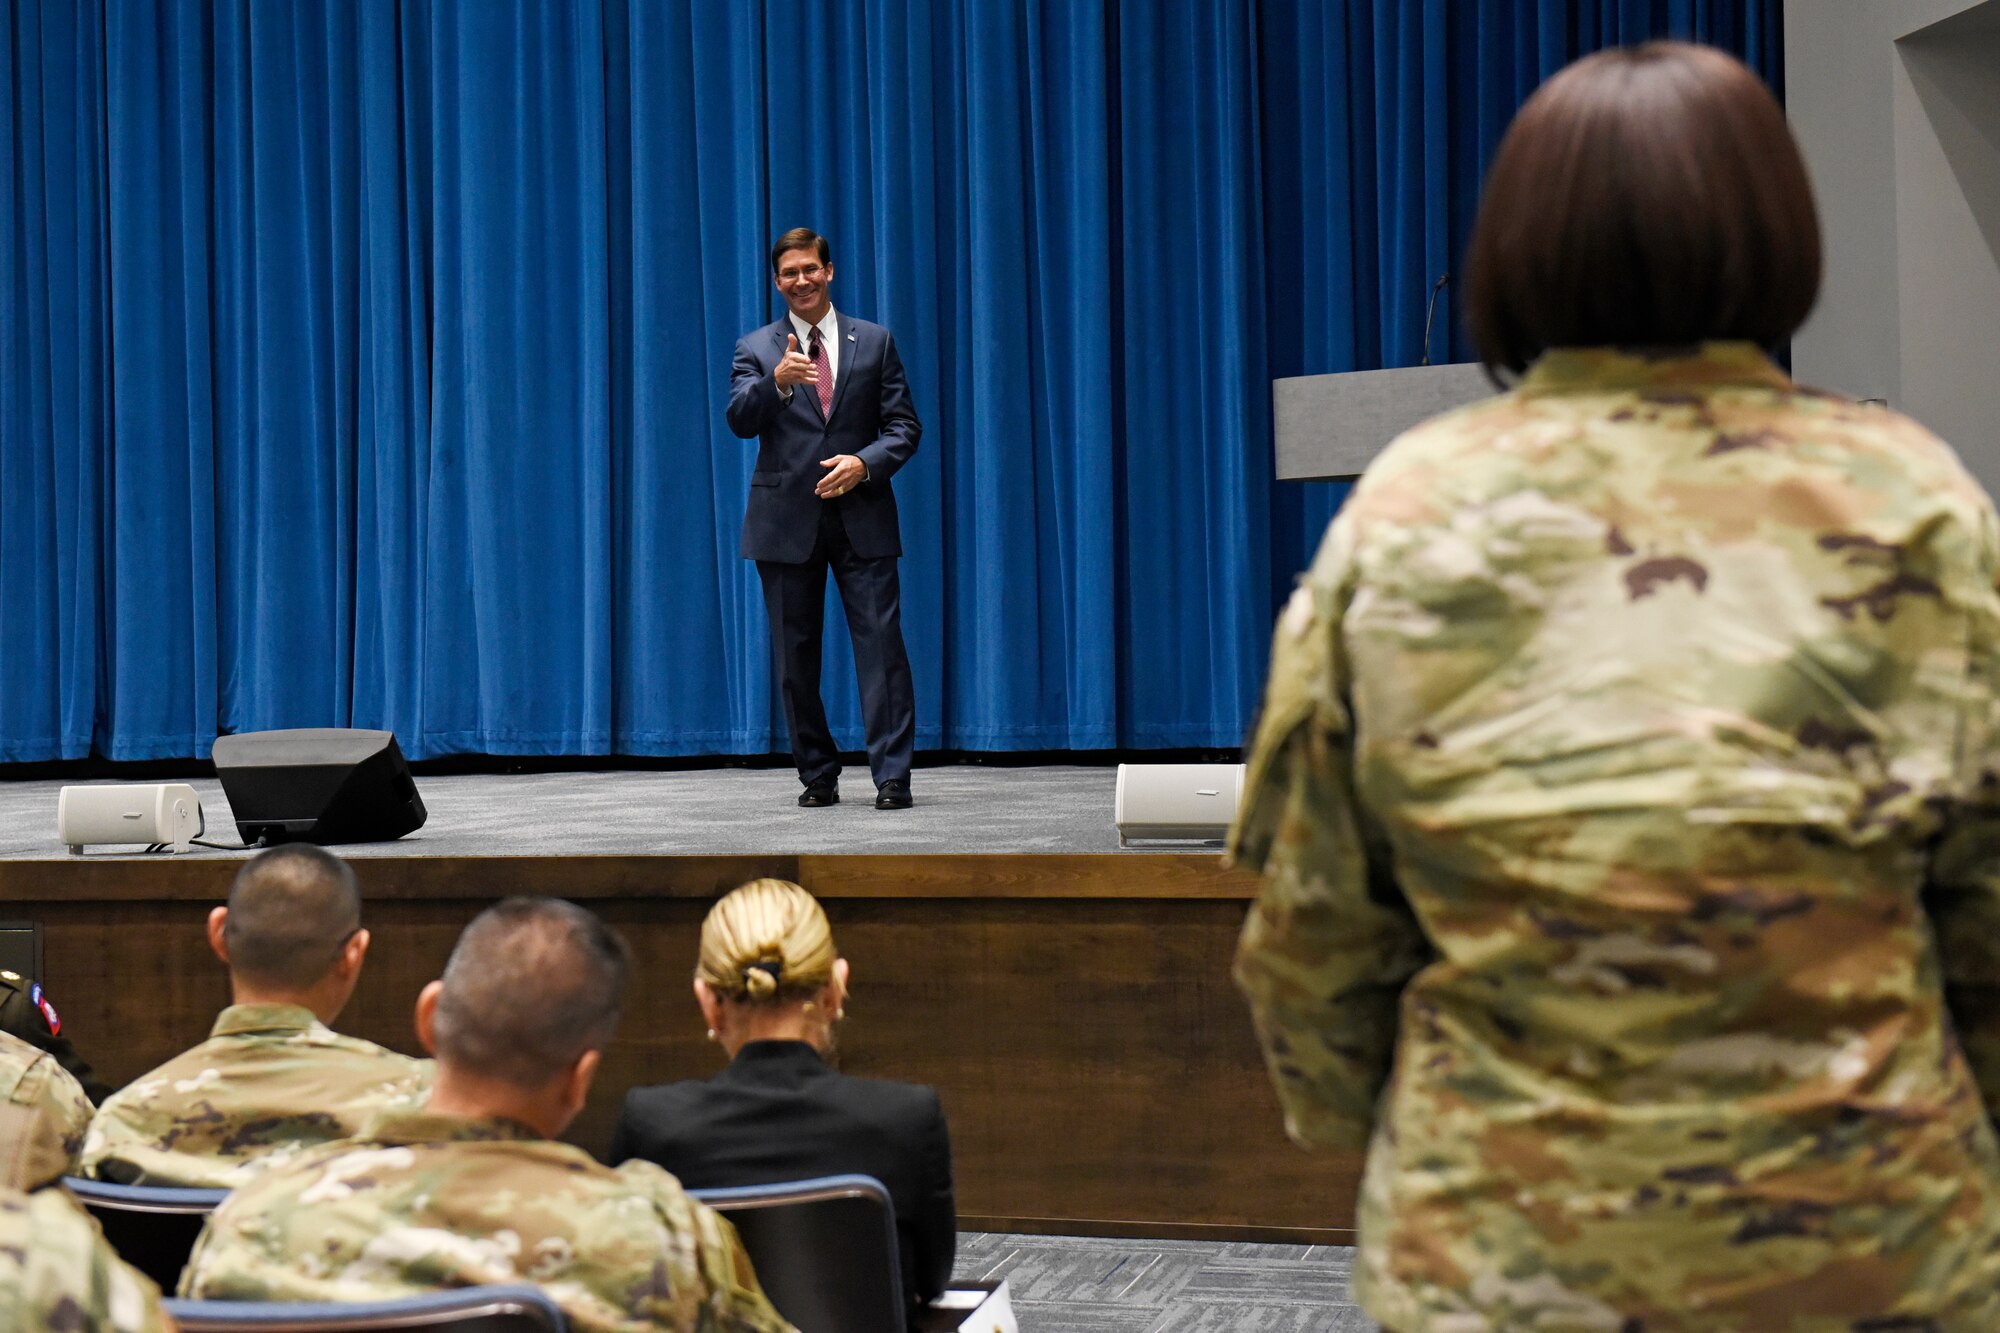 Secretary of Defense Mark T. Esper, answers questions during a town hall style meeting with members of Team Wright-Patt inside Kenney Hall at the Air Force Institute of Technology, Wright-Patterson Air Force Base, Ohio, Oct. 4, 2019. During his visit, Esper and his wife, Leah, toured several offices on base. (U.S. Air Force photo/Ty Greenlees)